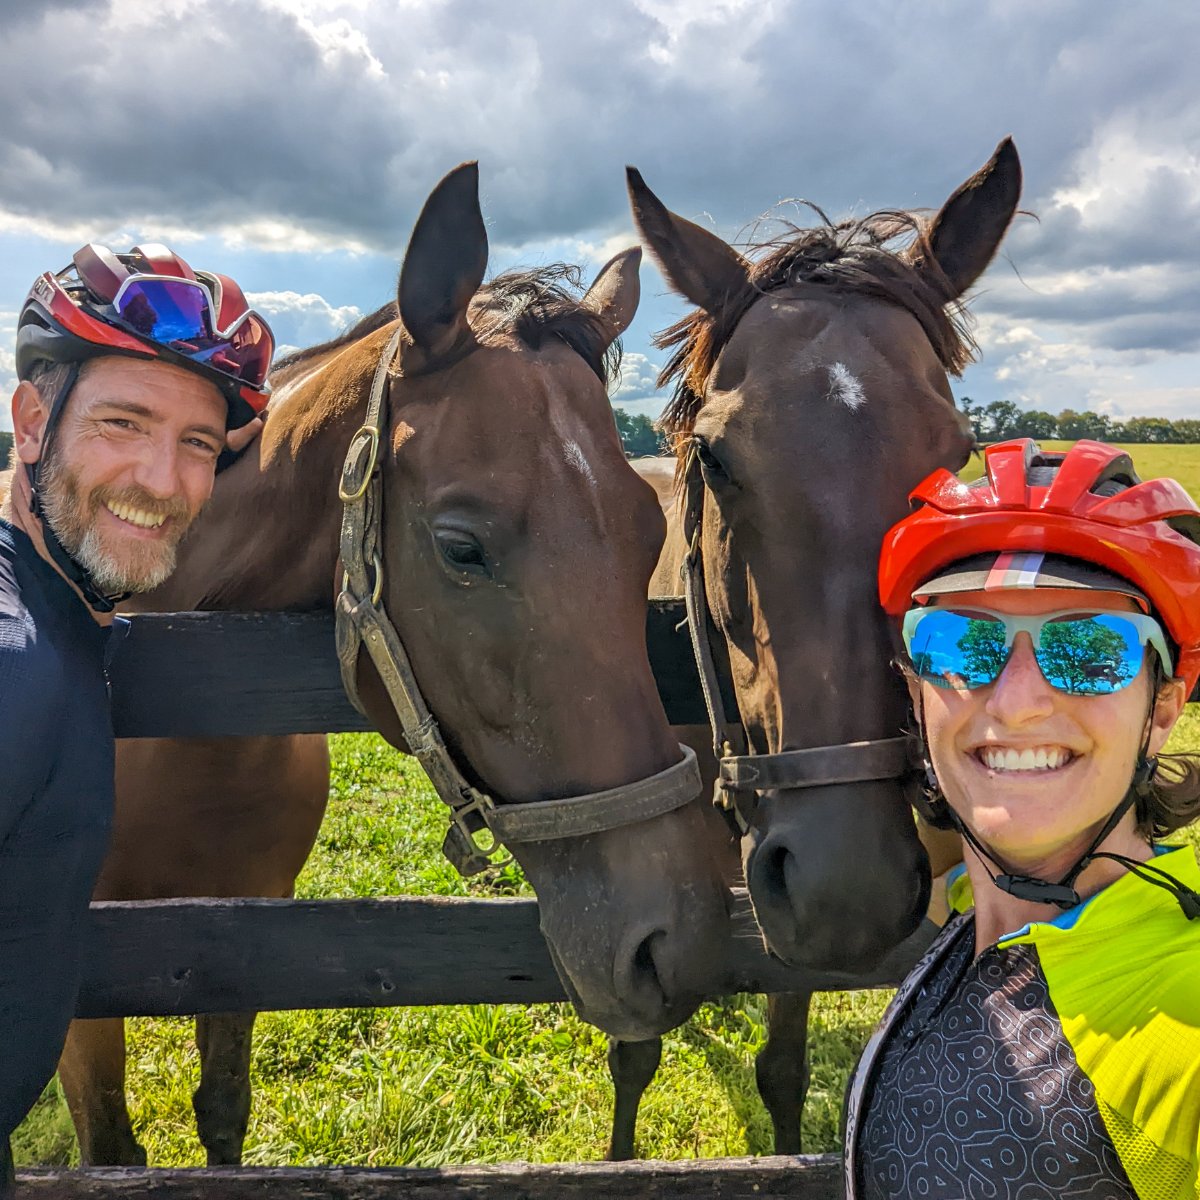 The Kentucky Derby is here! 🏇🎉 But why limit the fun to just one event? Join us on our Bourbon Country bike tour and discover more of what Kentucky has to offer: l8r.it/llpy

#BourbonCountry #KentuckyDerby #ExploreKentucky #BikeTour